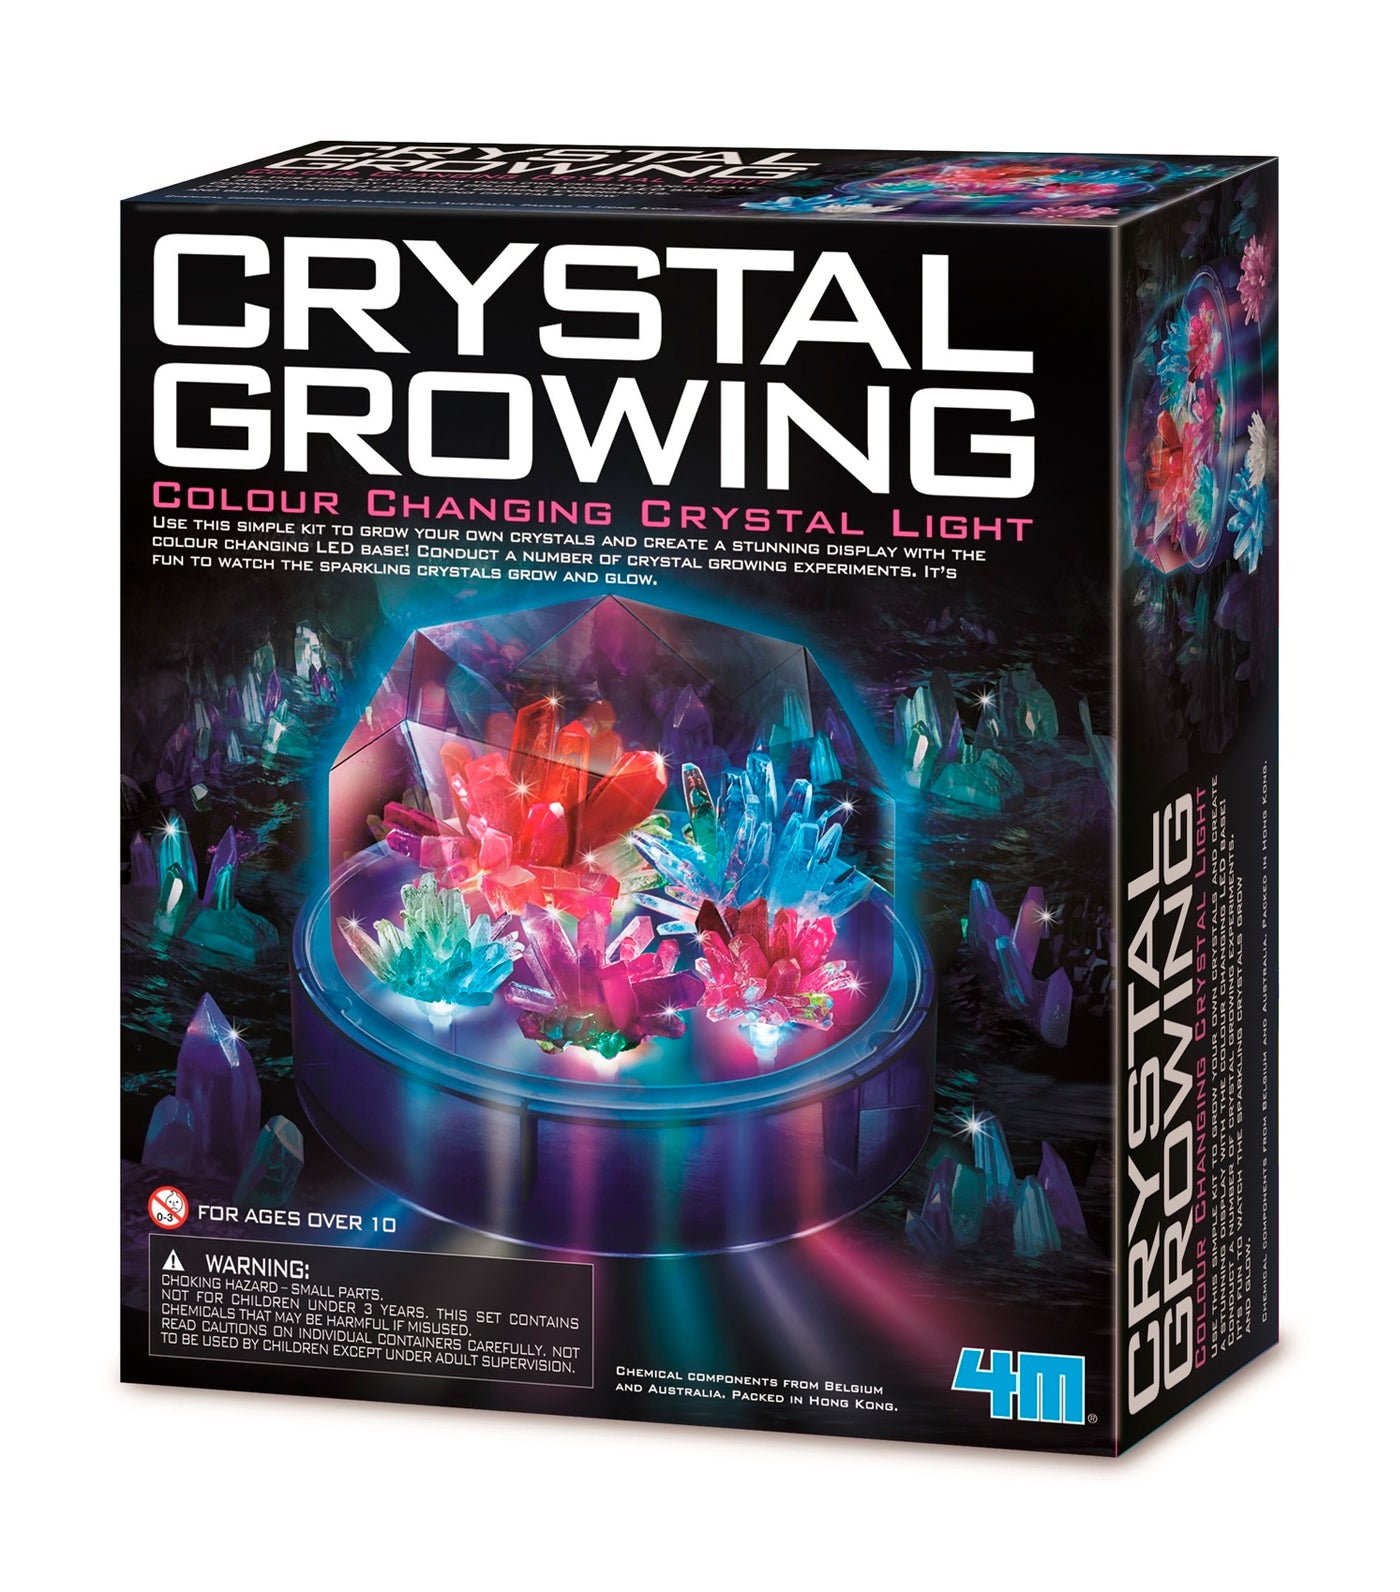 4m crystal growing – colour changing crystal light 